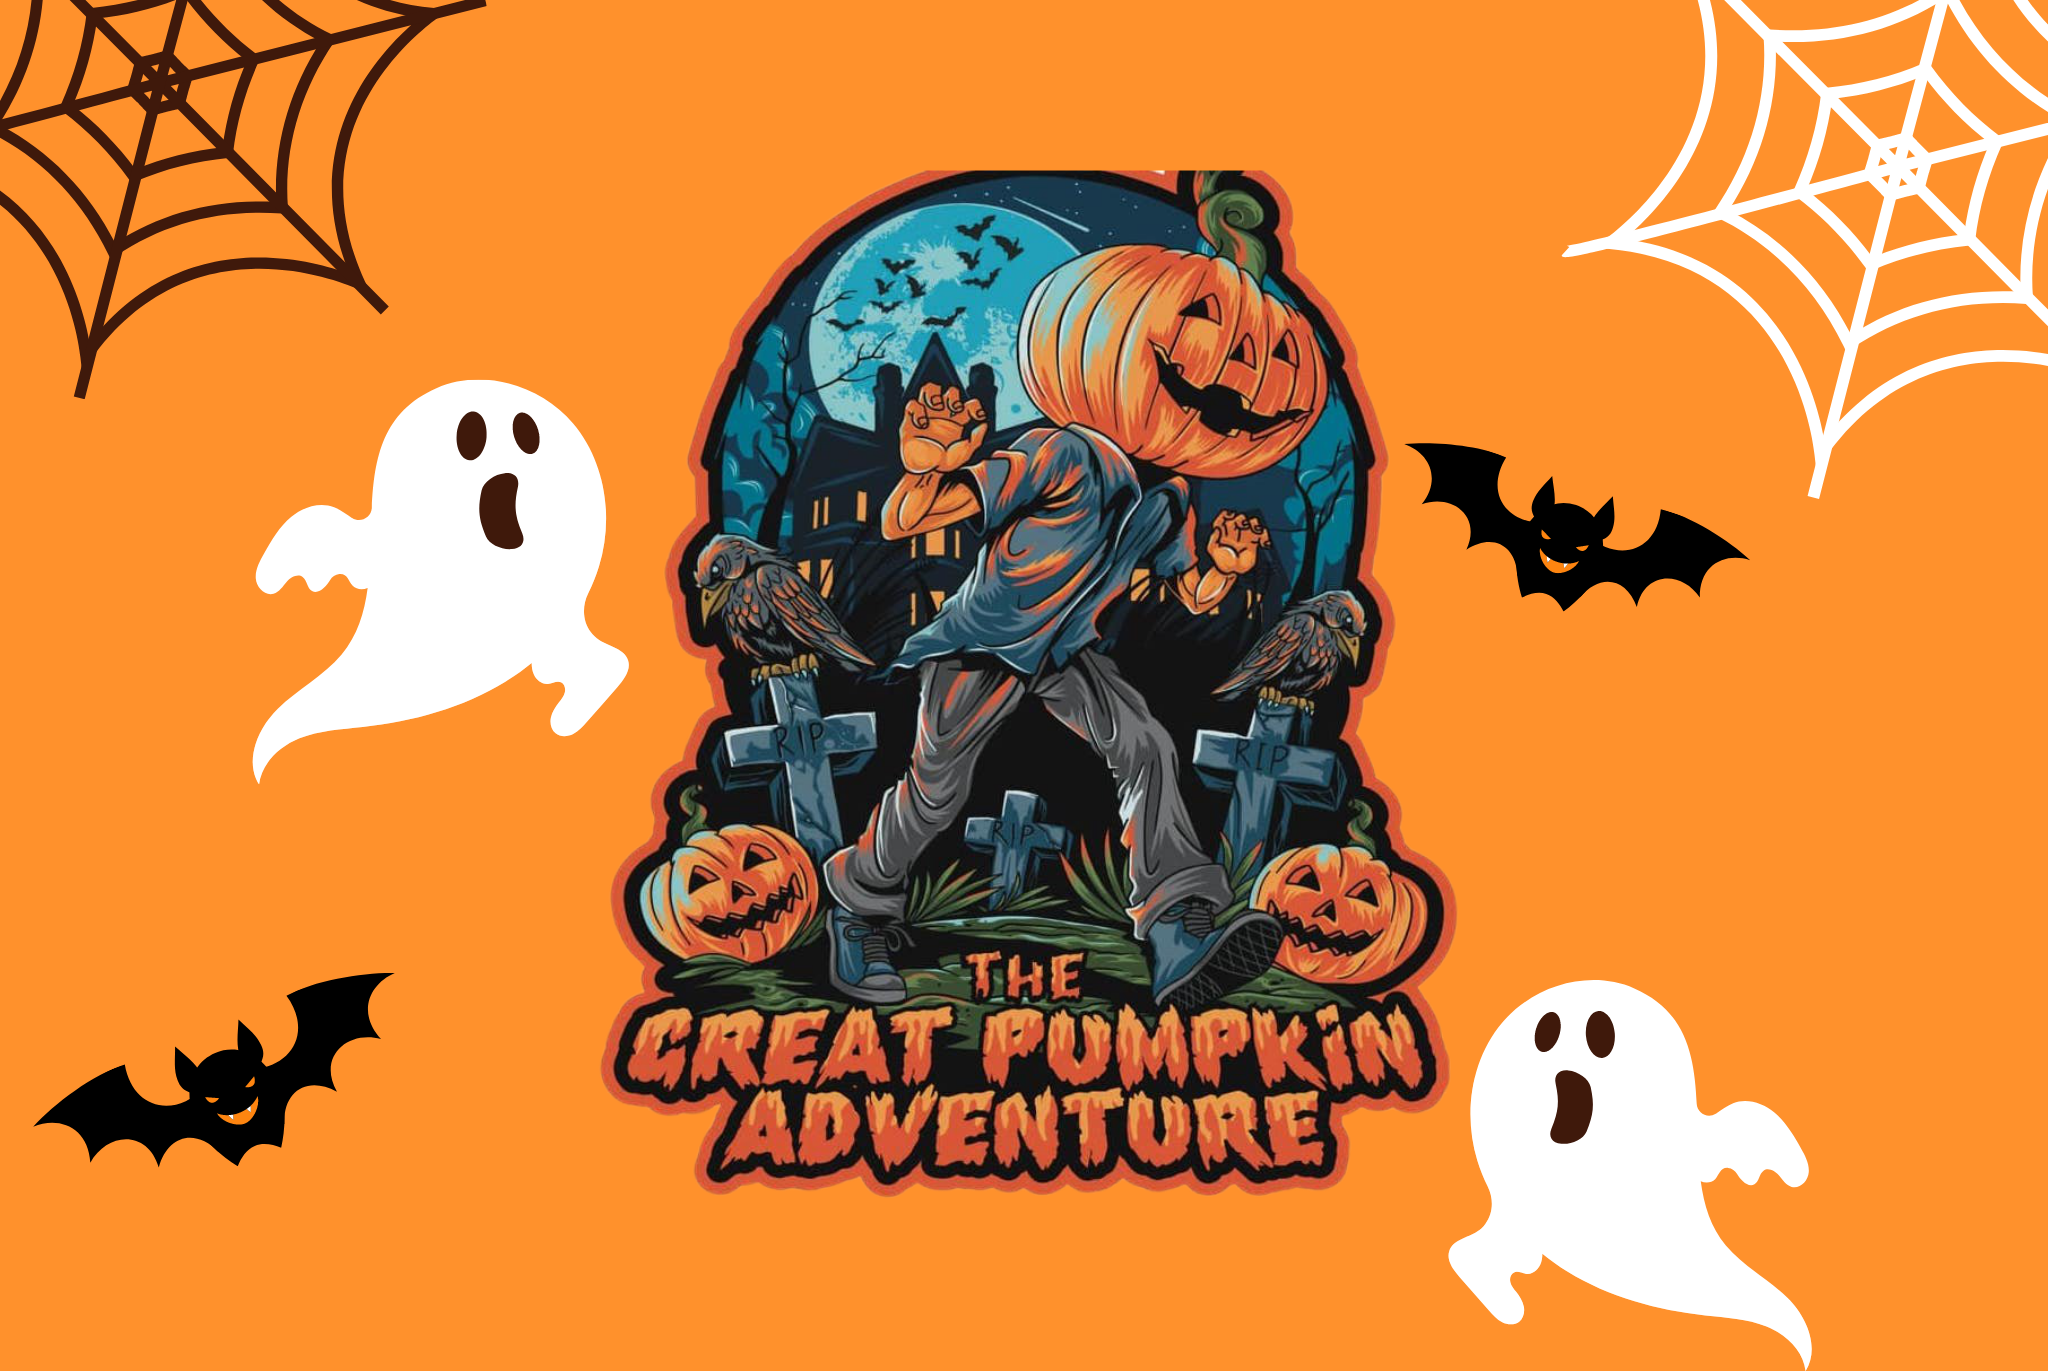 Celebrate Halloween 2021 at The Great Pumpkin Adventure at Golden Triangle Mall